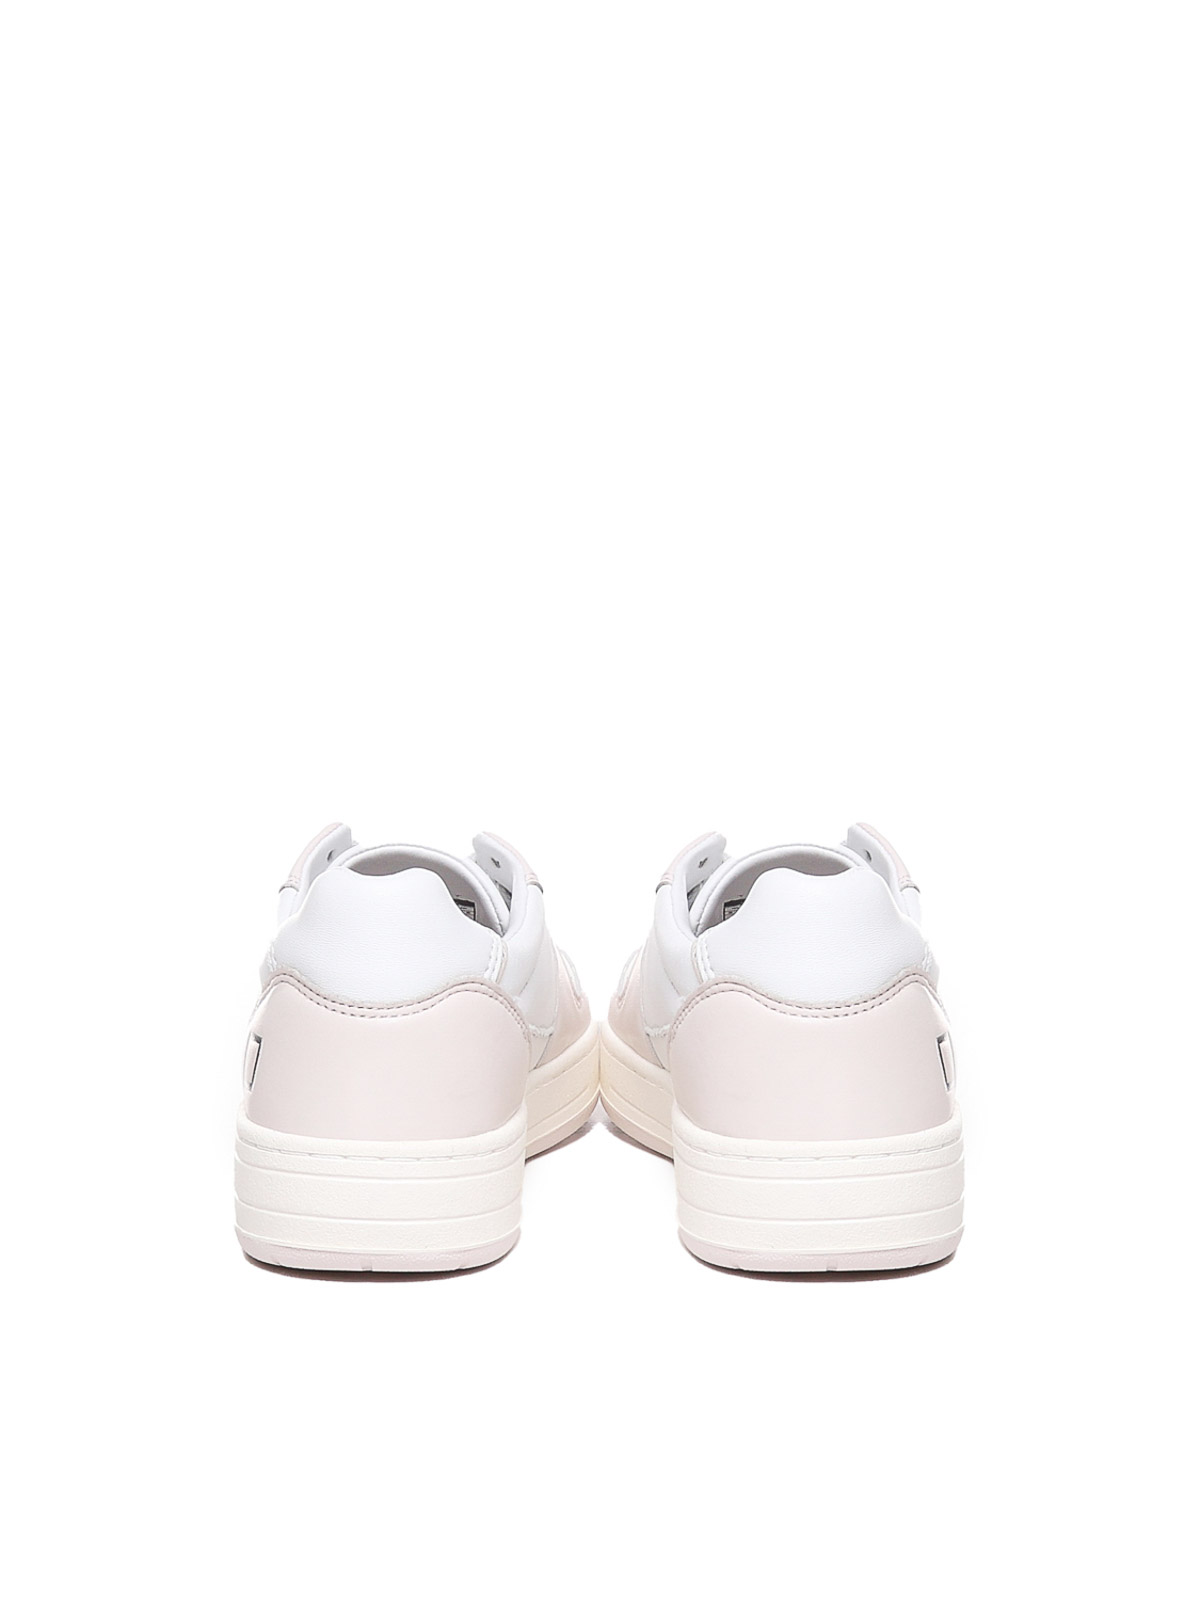 Shop Date Court 20 Soft Sneakers In White